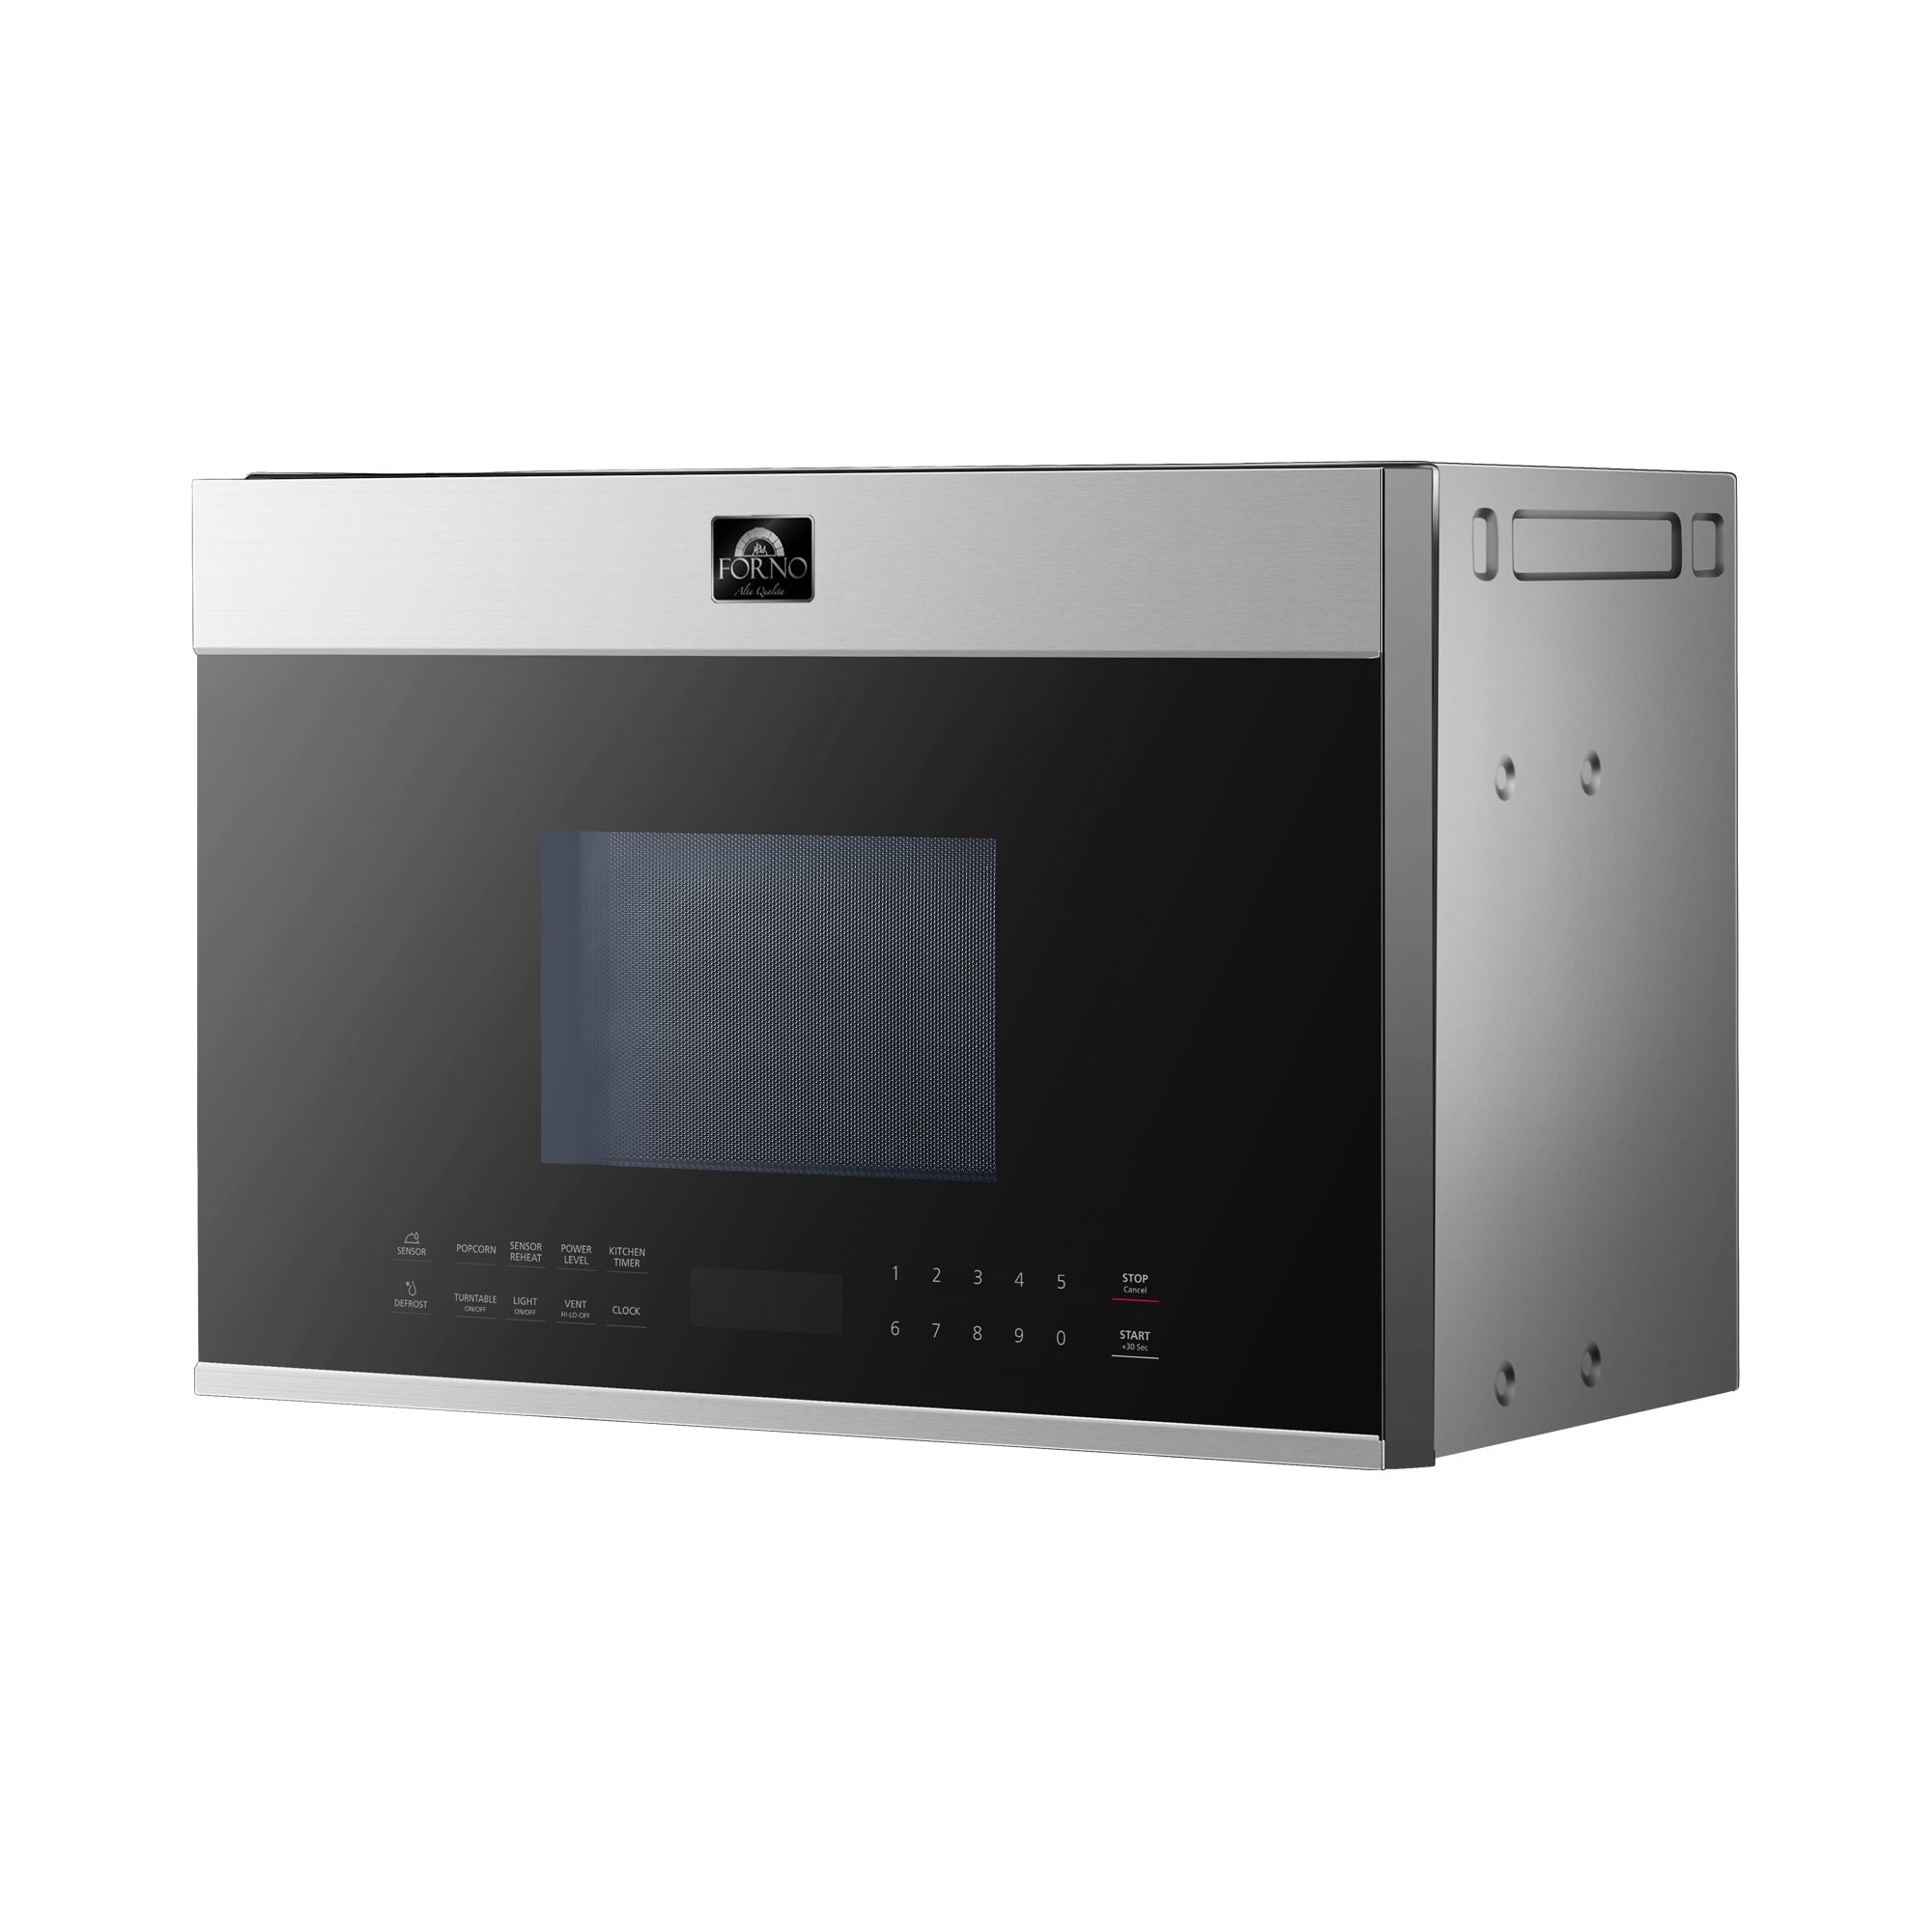 Forno Capriolo - 24 in. OTR Stainless Steel Microwave Oven 1.3 cu.ft.-